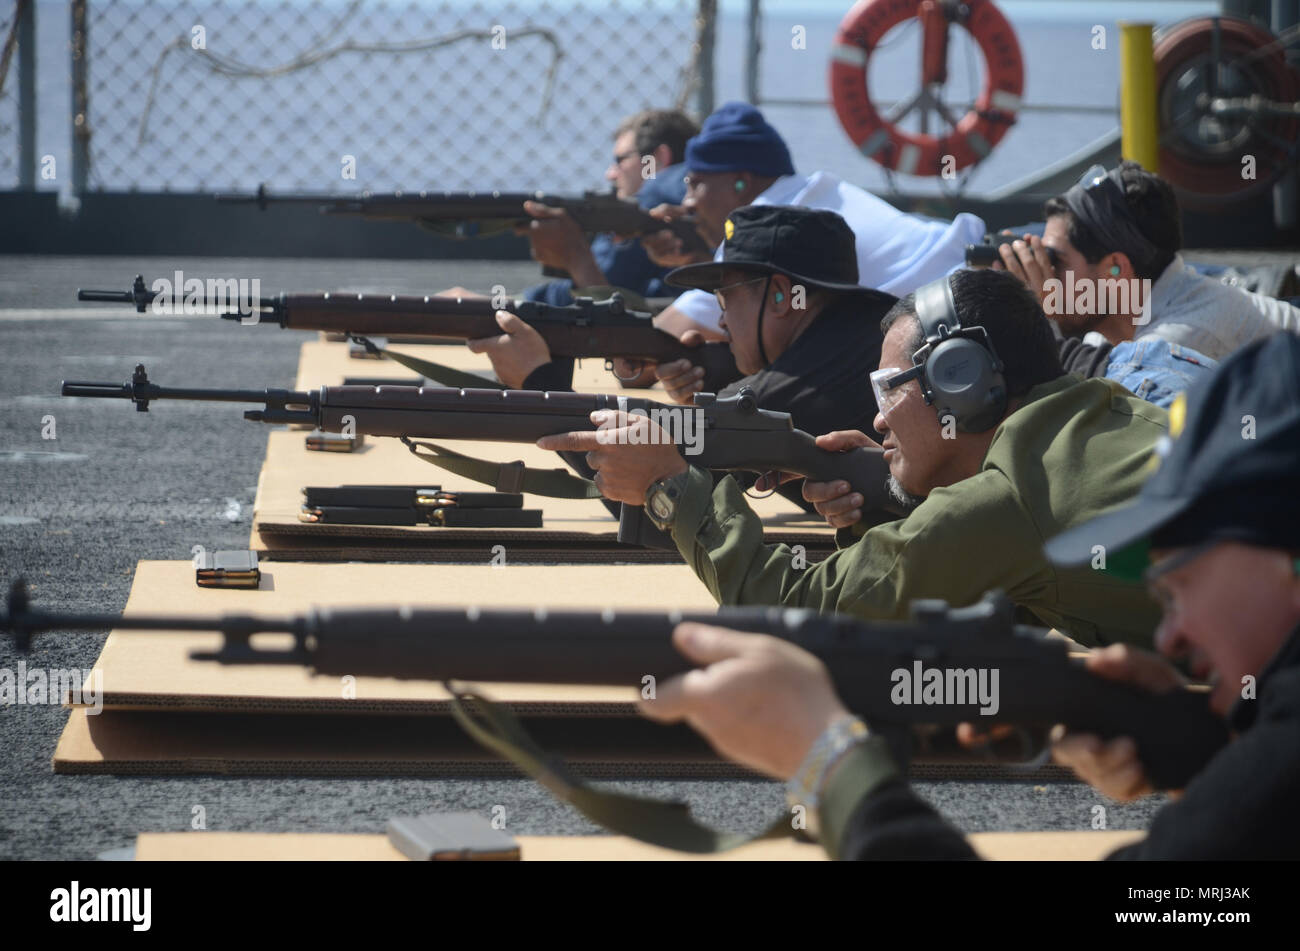 170621-N-WJ640-068 PACIFIC OCEAN (June 21, 2017) Civilian Mariners participate in live fire arms training onboard the flight deck of USNS Sacagawea (T-AKE 2) during Koa Moana 17, June 21. The Koa Moana 17 (Ocean Warrior) exercise is designed to improve interoperability; enhance military-to-military relations and expose Marine Corps forces to different types of terrain for familiarity in the event of a natural disaster or crisis in the region. (U.S. Navy photo by Mass Communication Specialist 3rd Class Madailein Abbott) Stock Photo